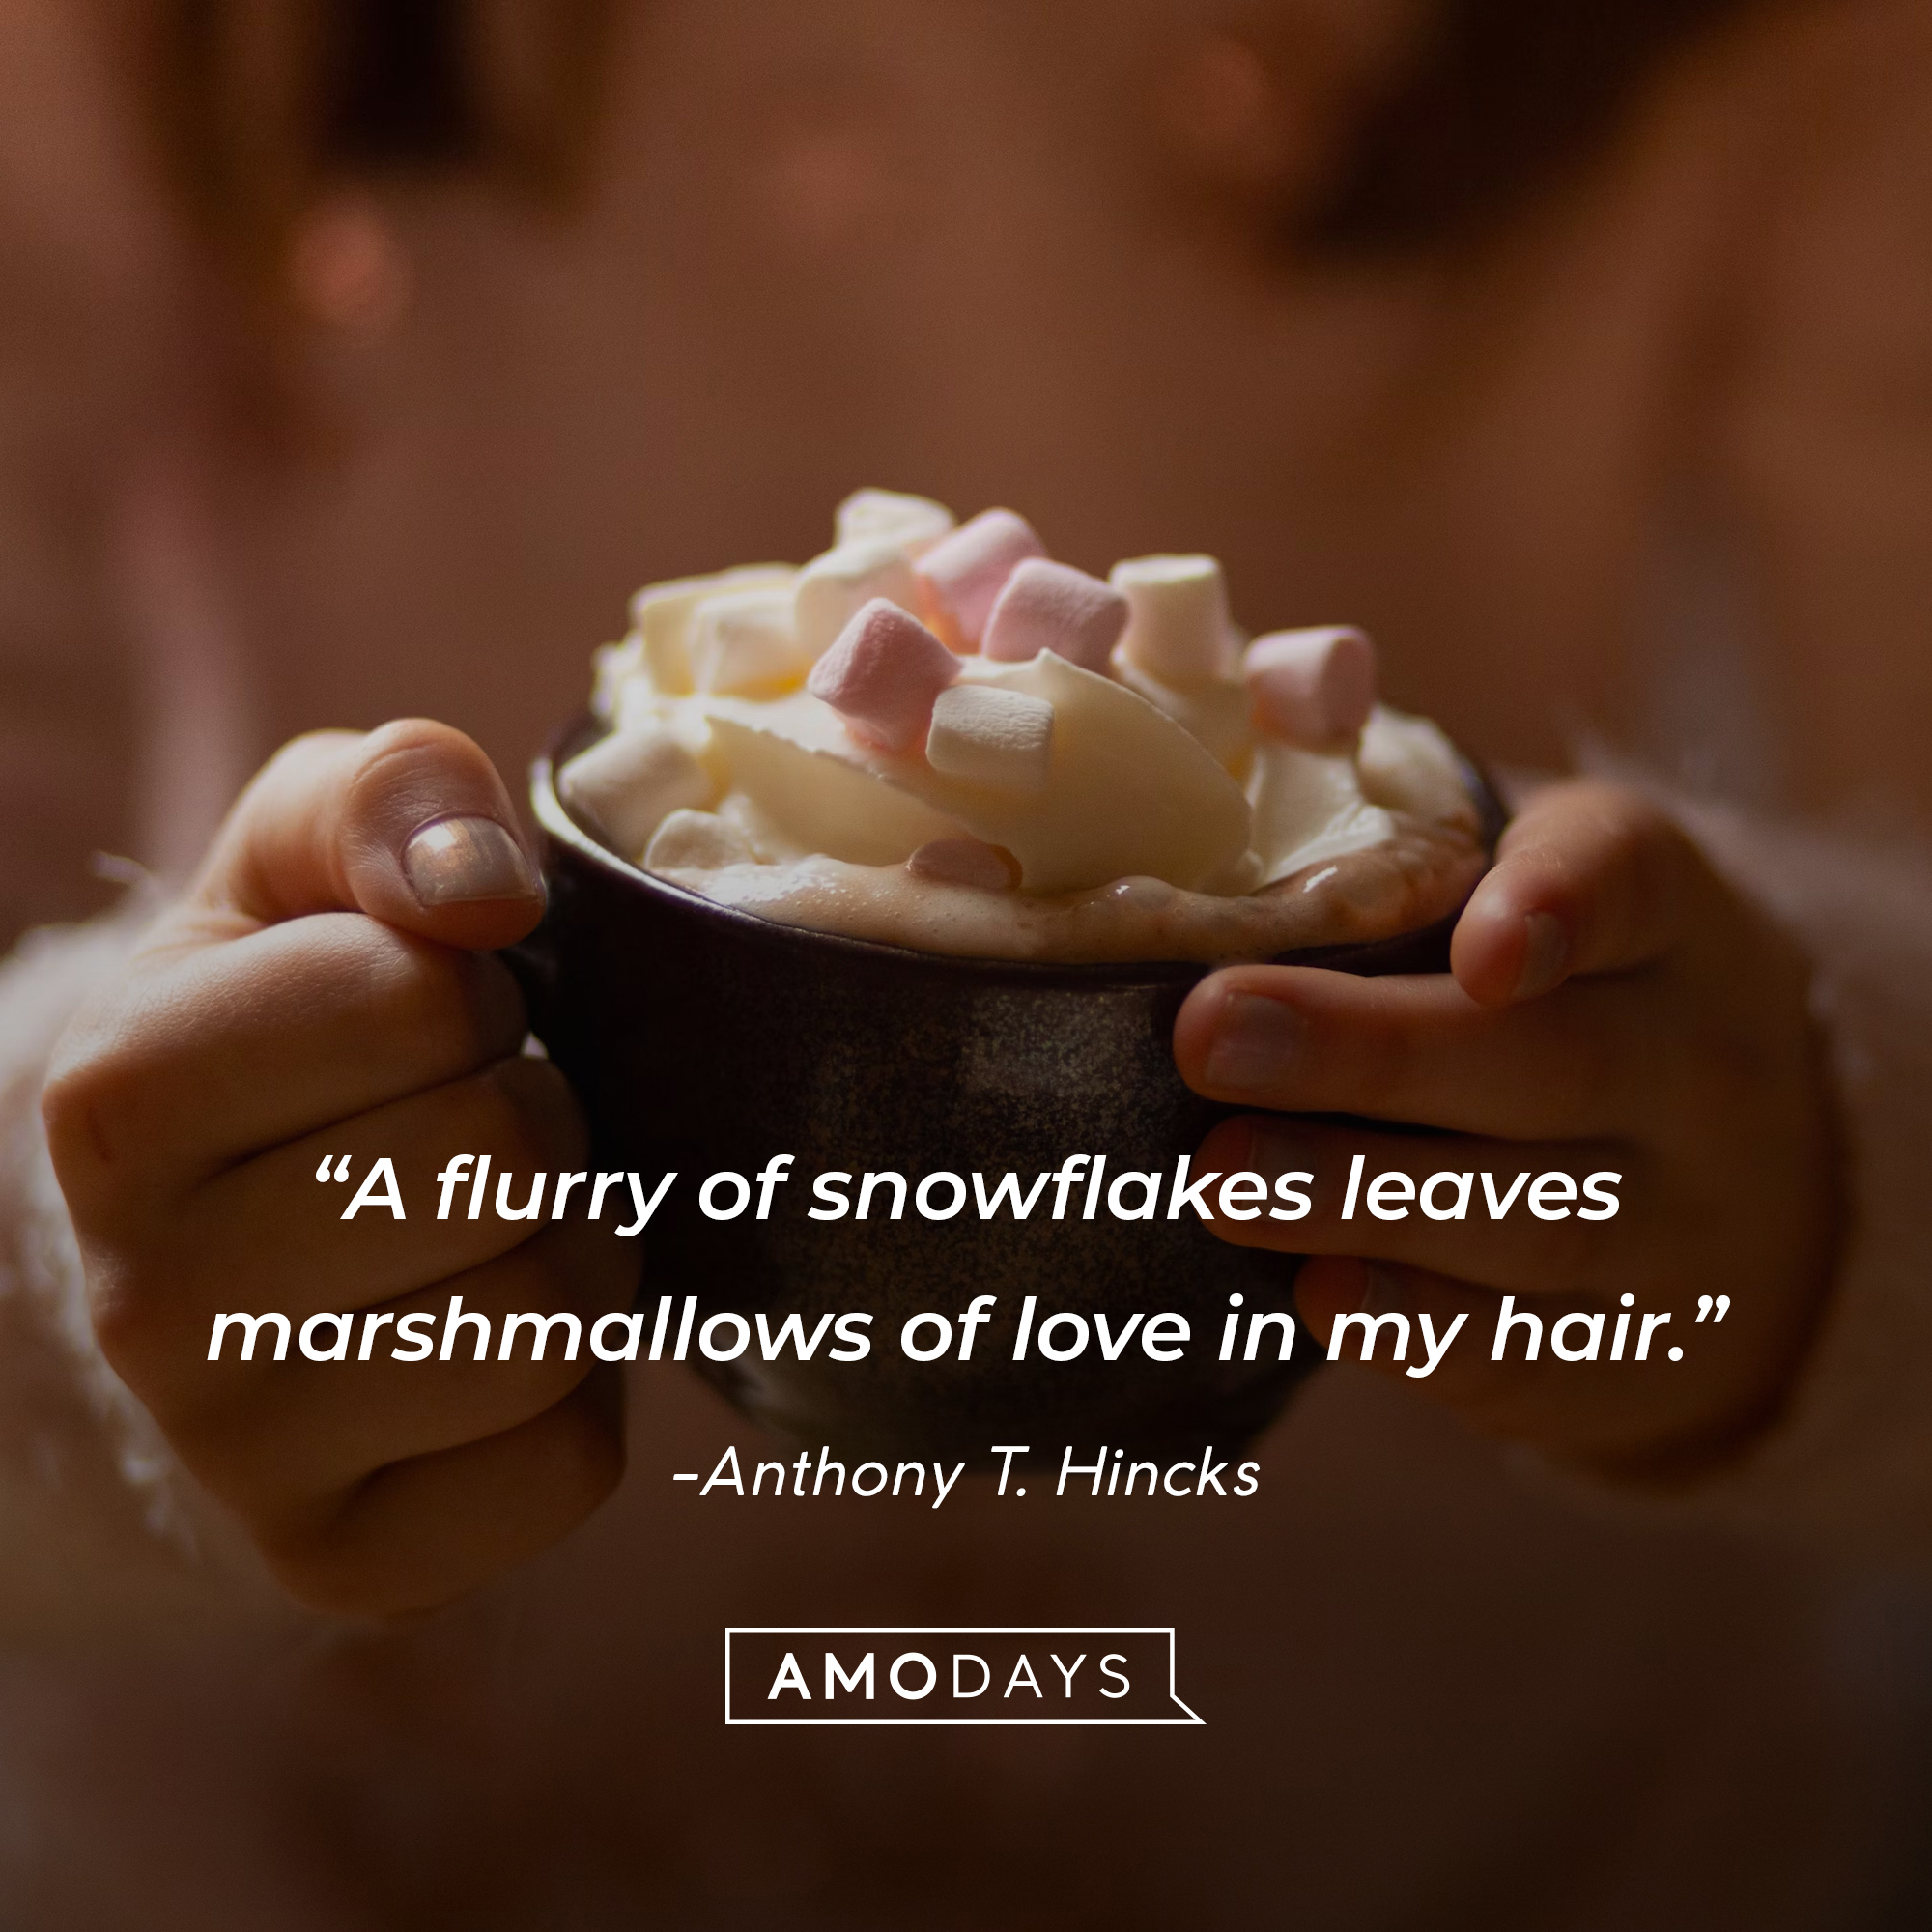 Anthony T. Hincks' quote: "A flurry of snowflakes leaves marshmallows of love in my hair." | Source: Goodreads